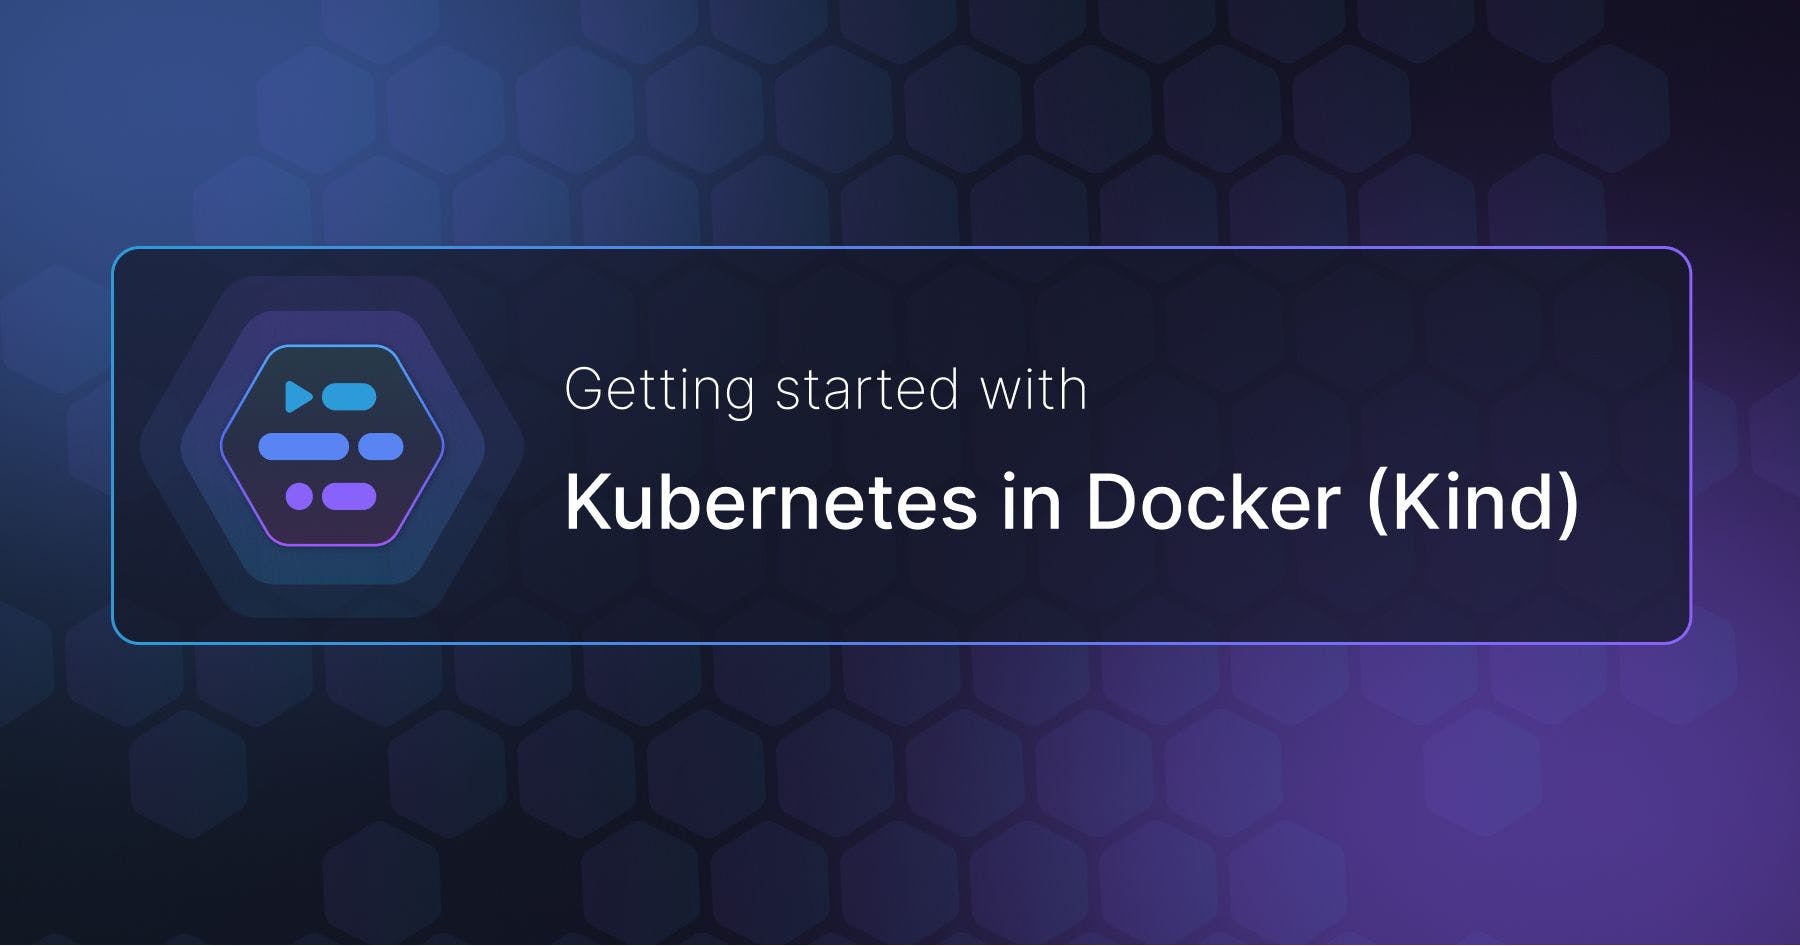 Adaptive Automation Technologies, Inc. - Getting started with Kubernetes in Docker (Kind)